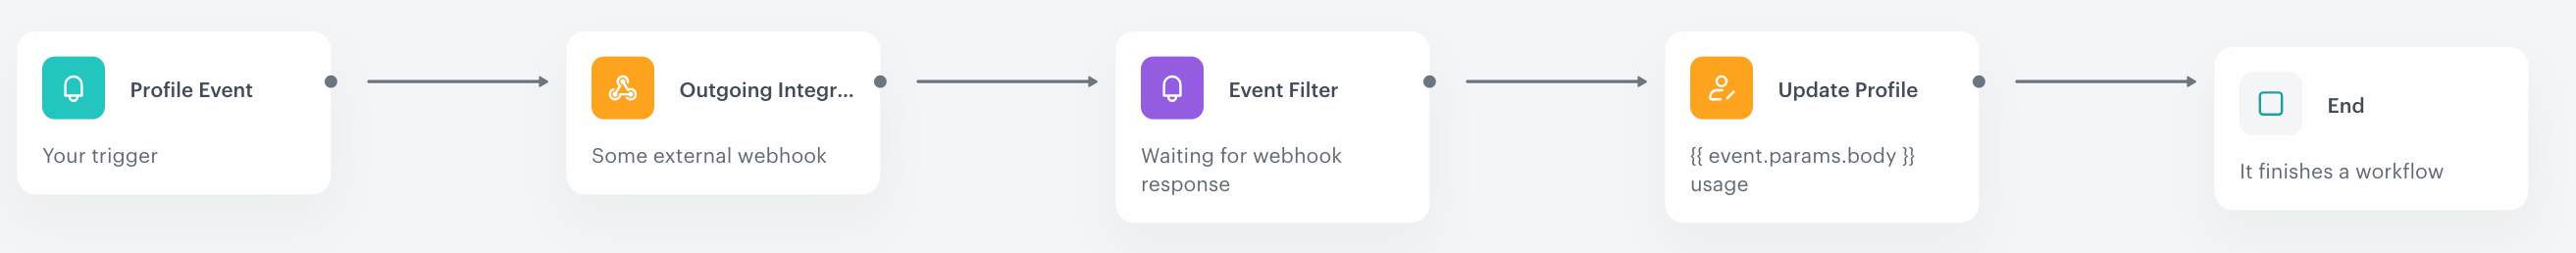 Exemplary workflow that uses the event context